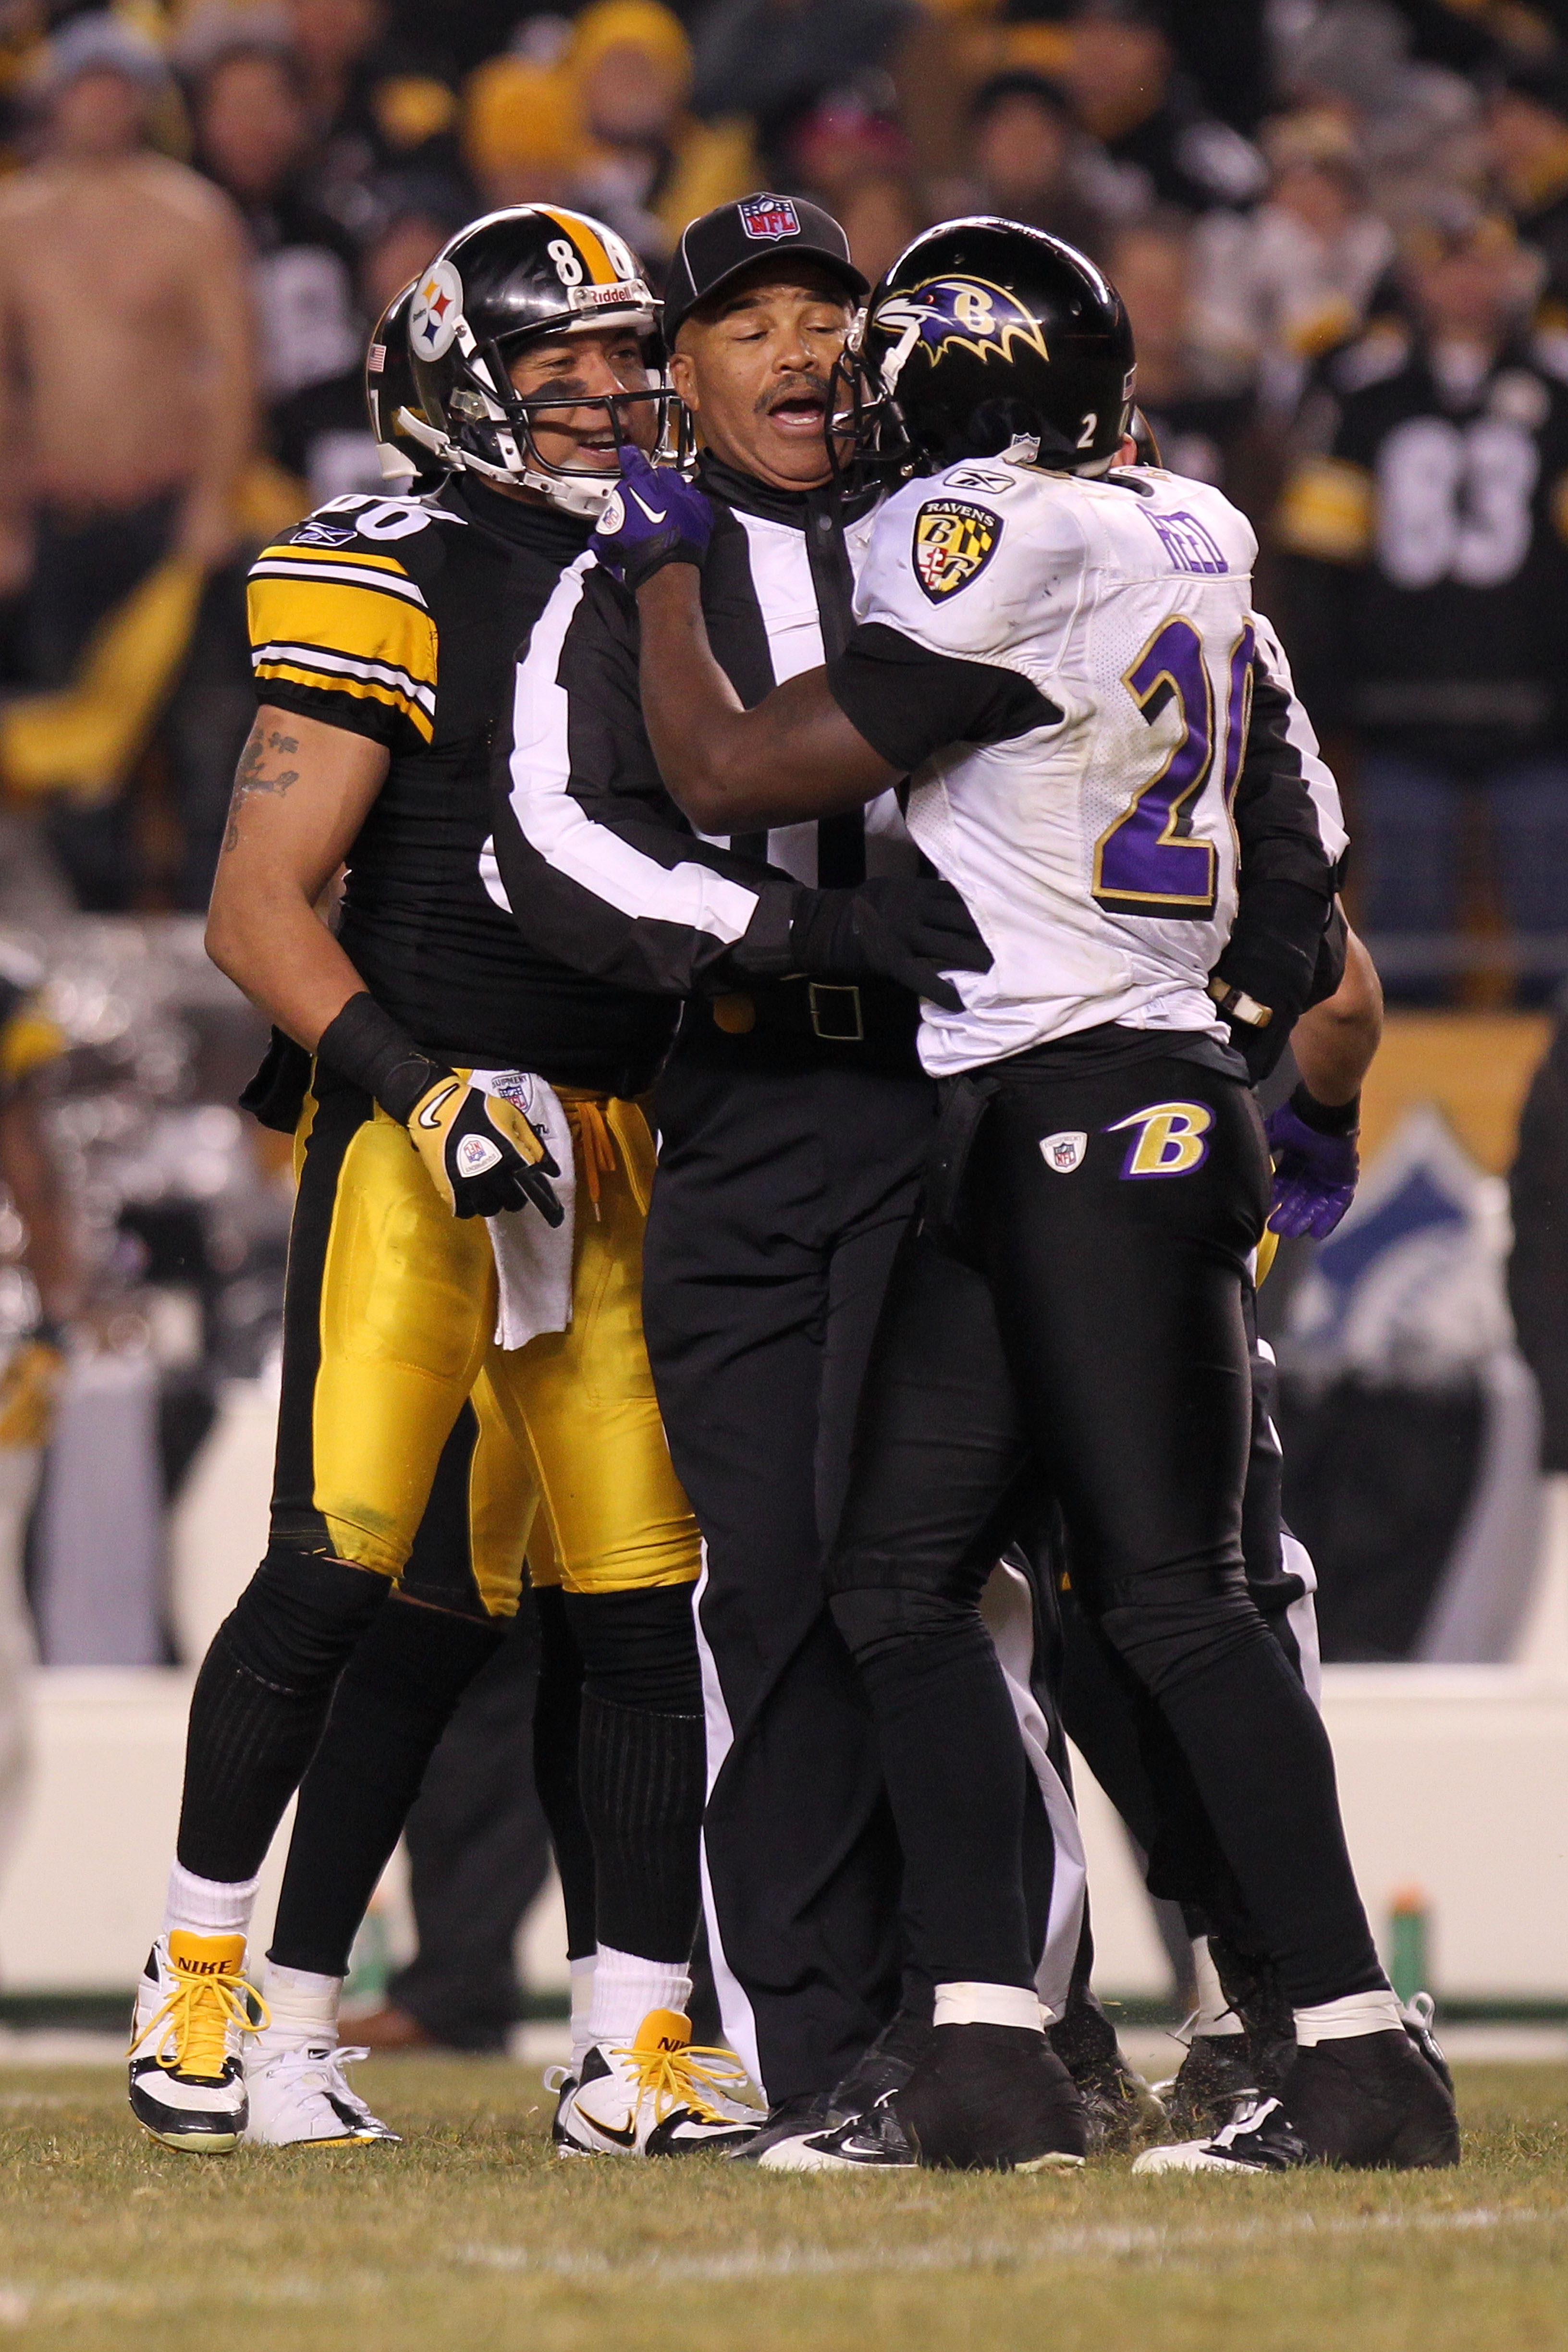 PITTSBURGH, PA - JANUARY 15:  Safety Ed Reed #20 of the Baltimore Ravens and wide receiver Hines Ward #86 of the Pittsburgh Steelers are separated by a referee after a play during the AFC Divisional Playoff Game at Heinz Field on January 15, 2011 in Pitts